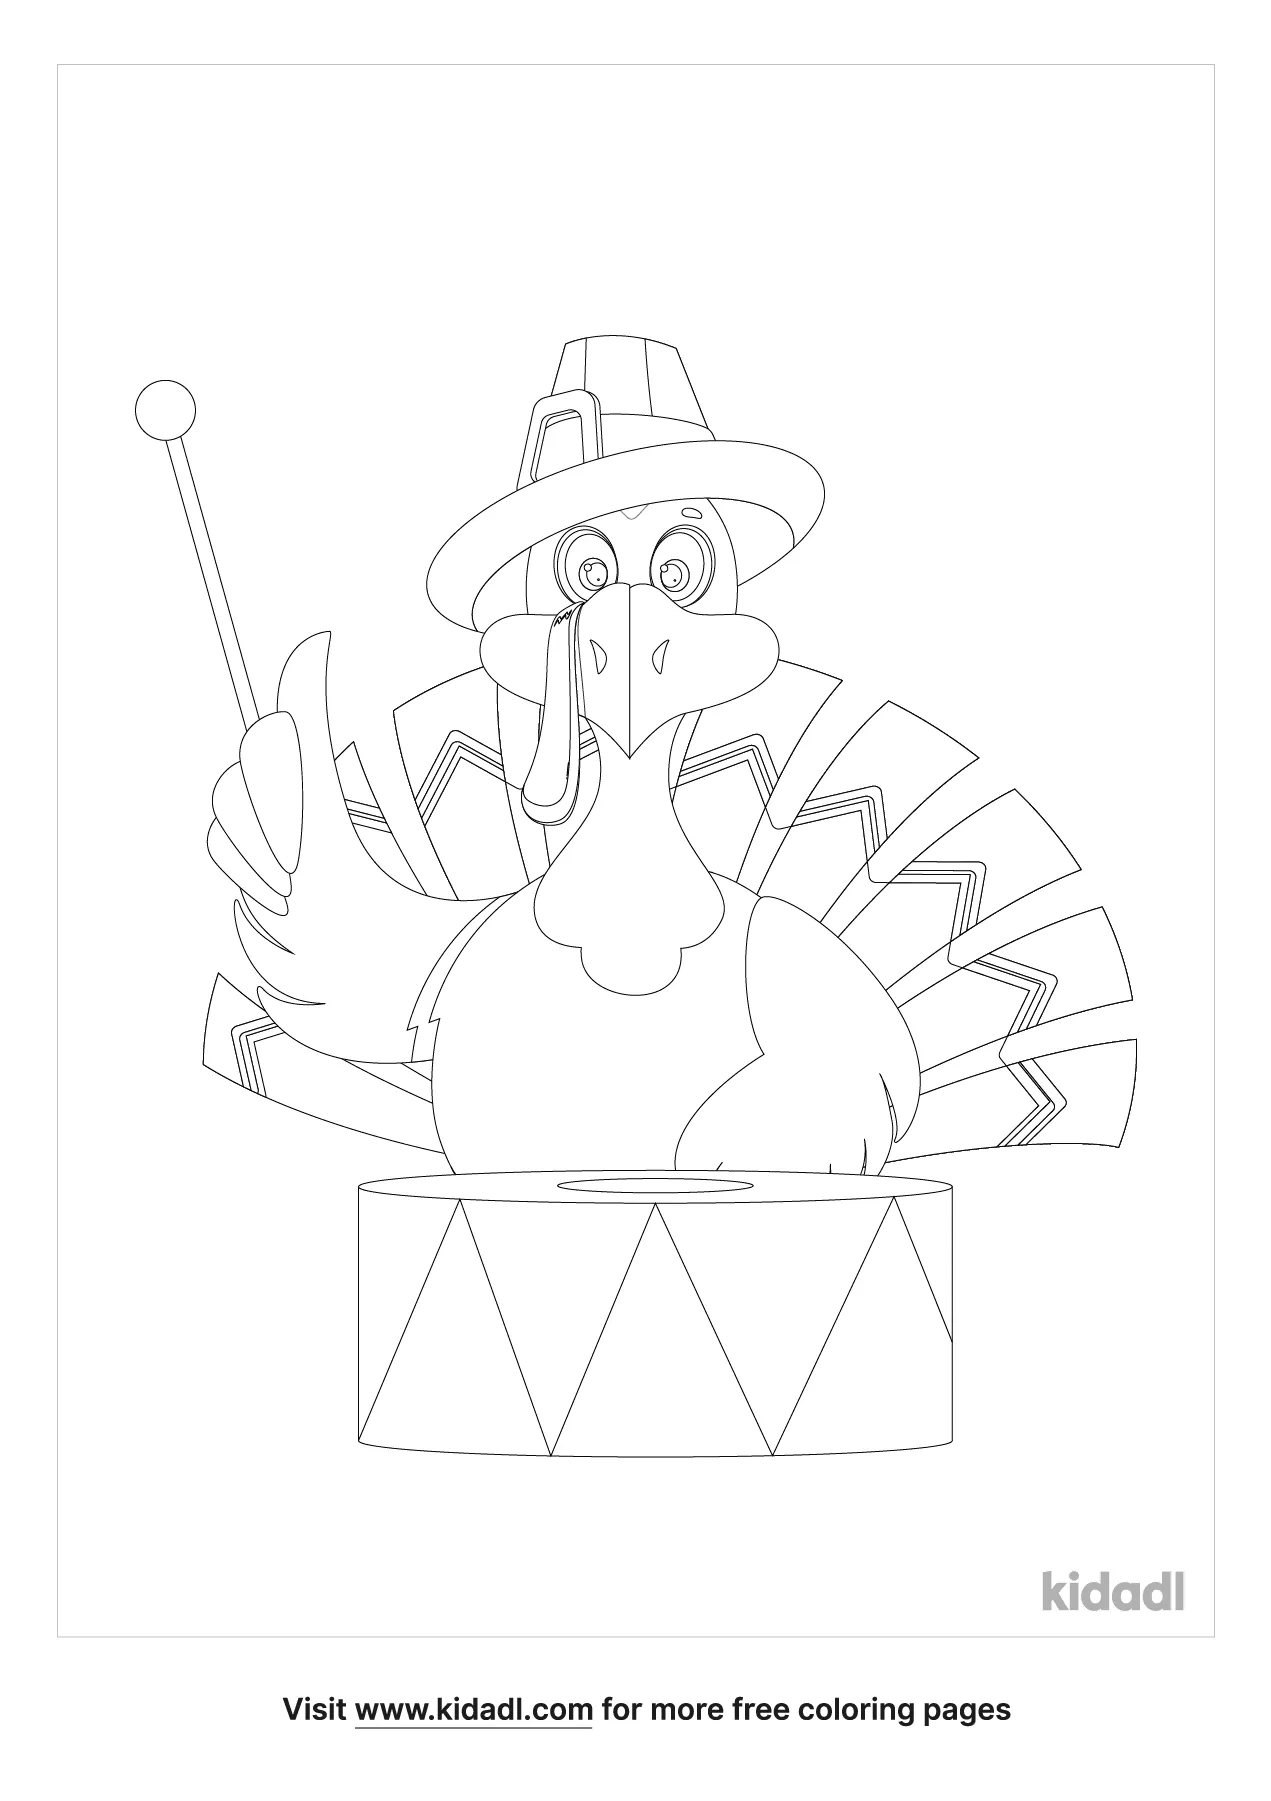 Turkey Playing A Musical Instrument Coloring Page